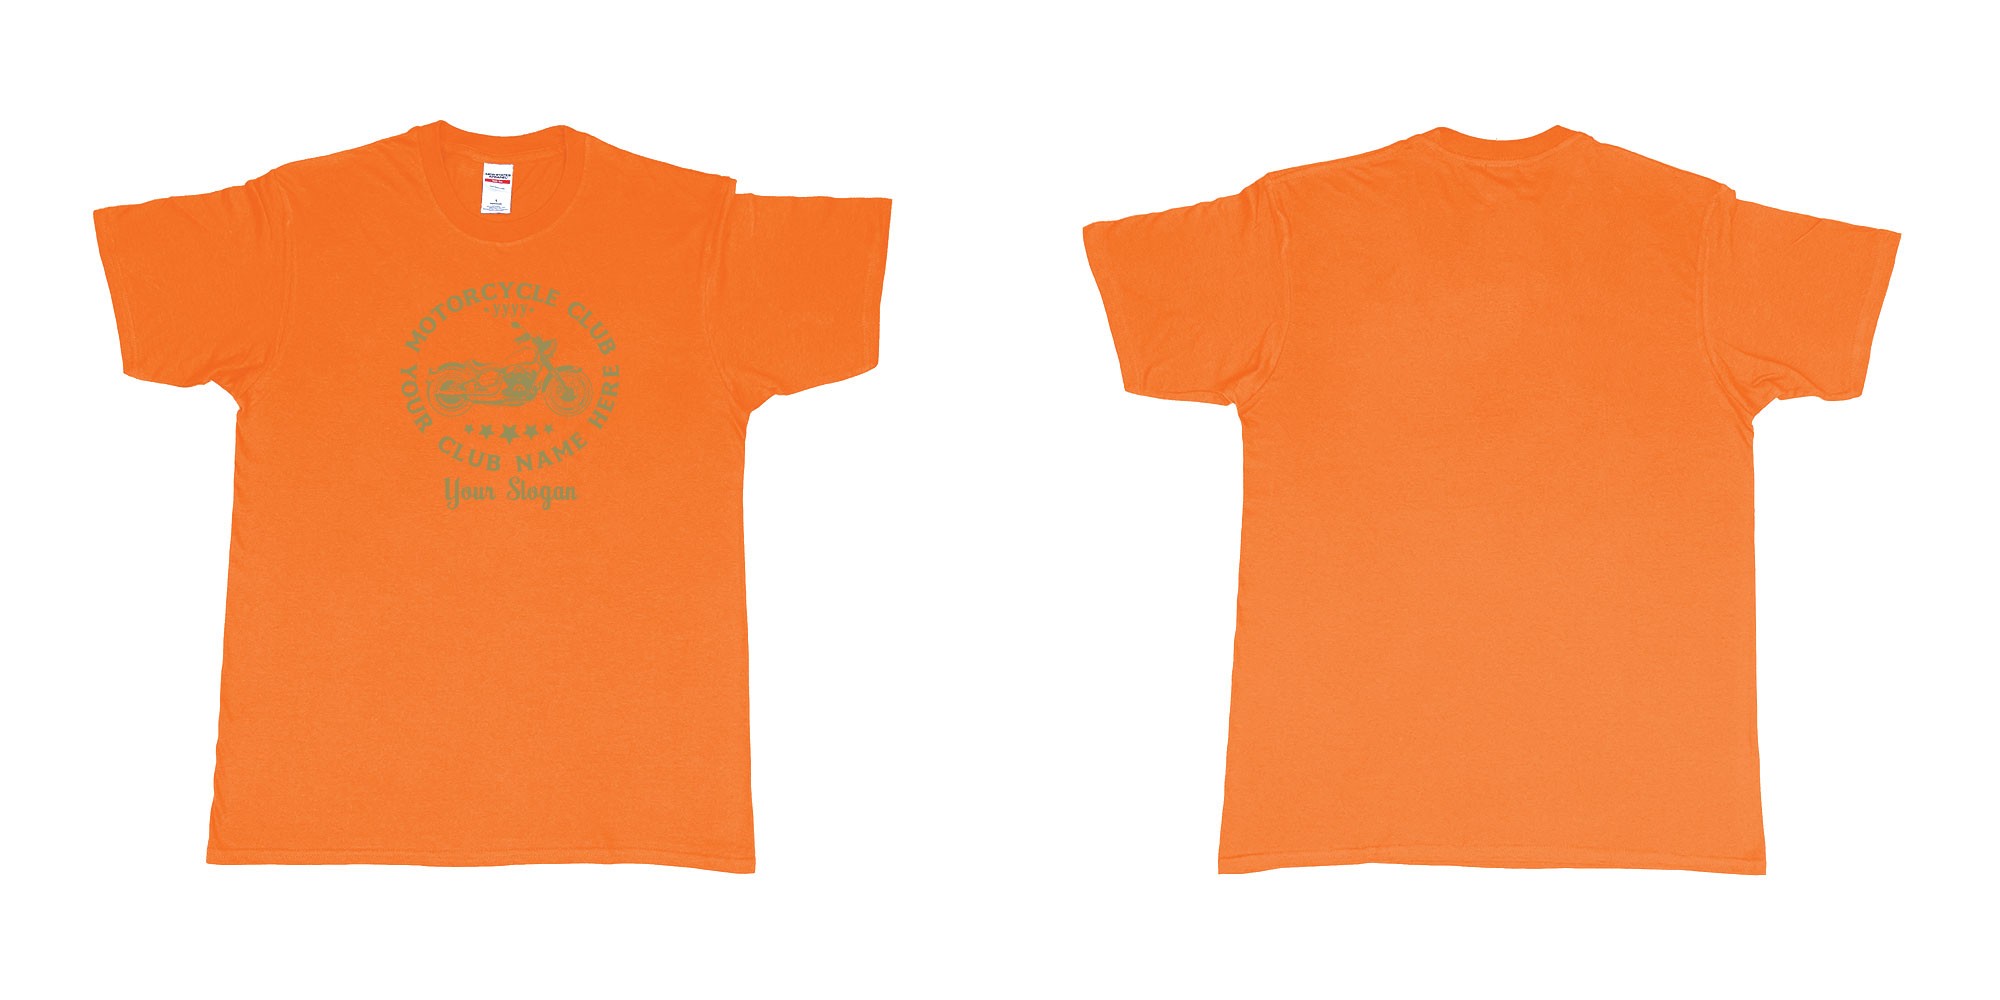 Custom tshirt design old bike motor bike club in fabric color orange choice your own text made in Bali by The Pirate Way